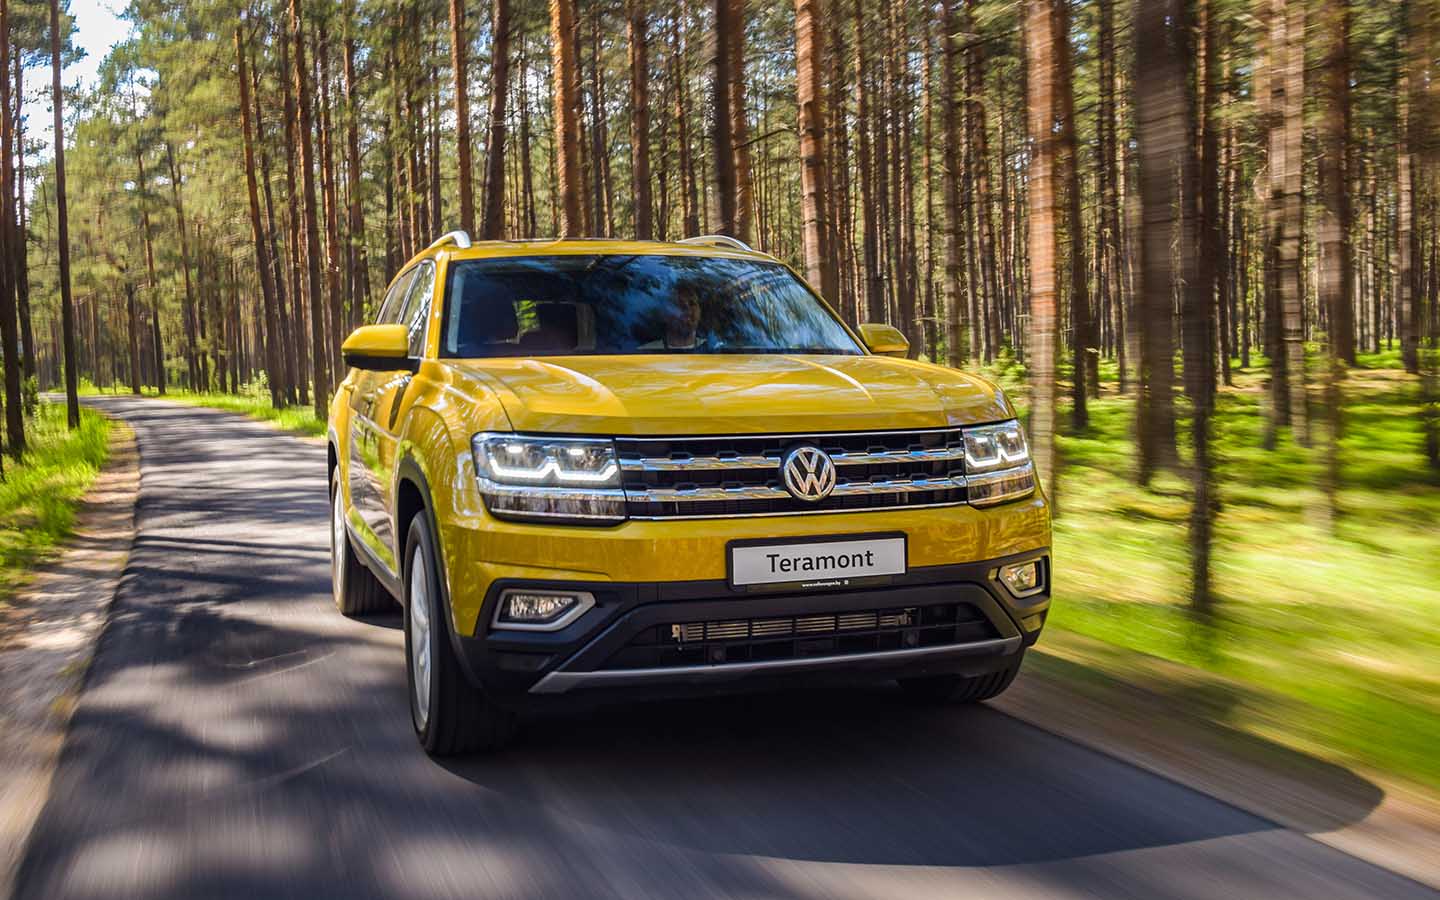 the latest model of the VW teramont has a redesigned exterior design